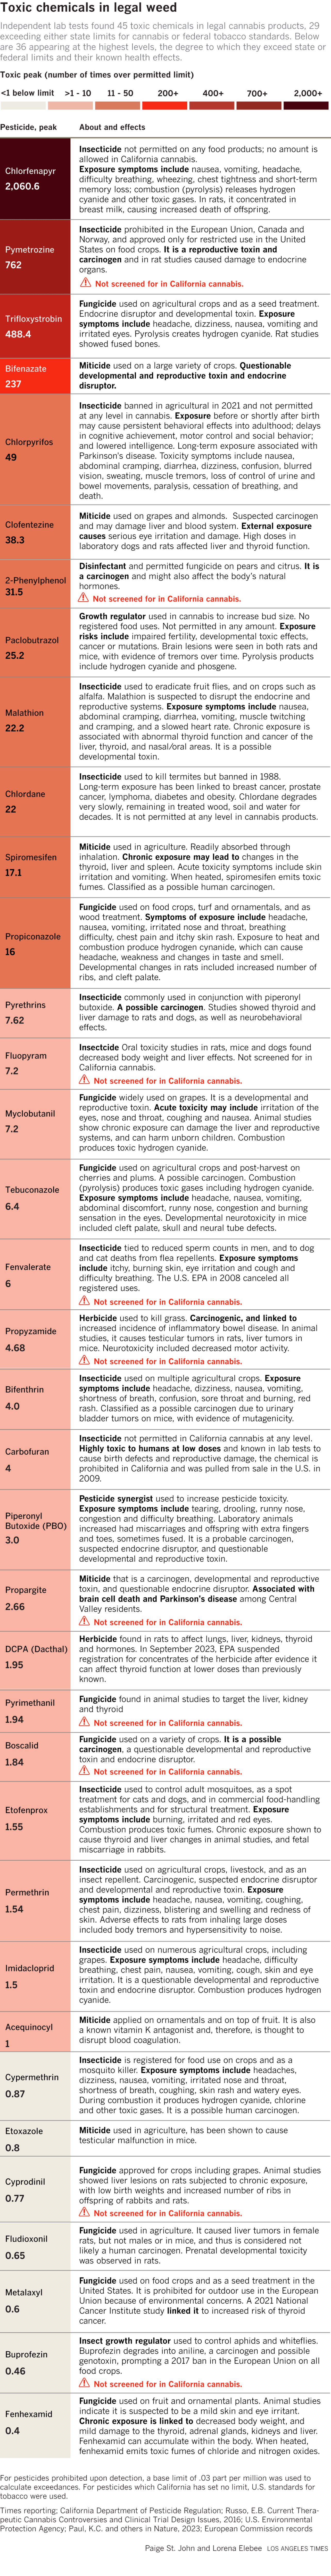 List of dangerous chemical toxins and their effects.